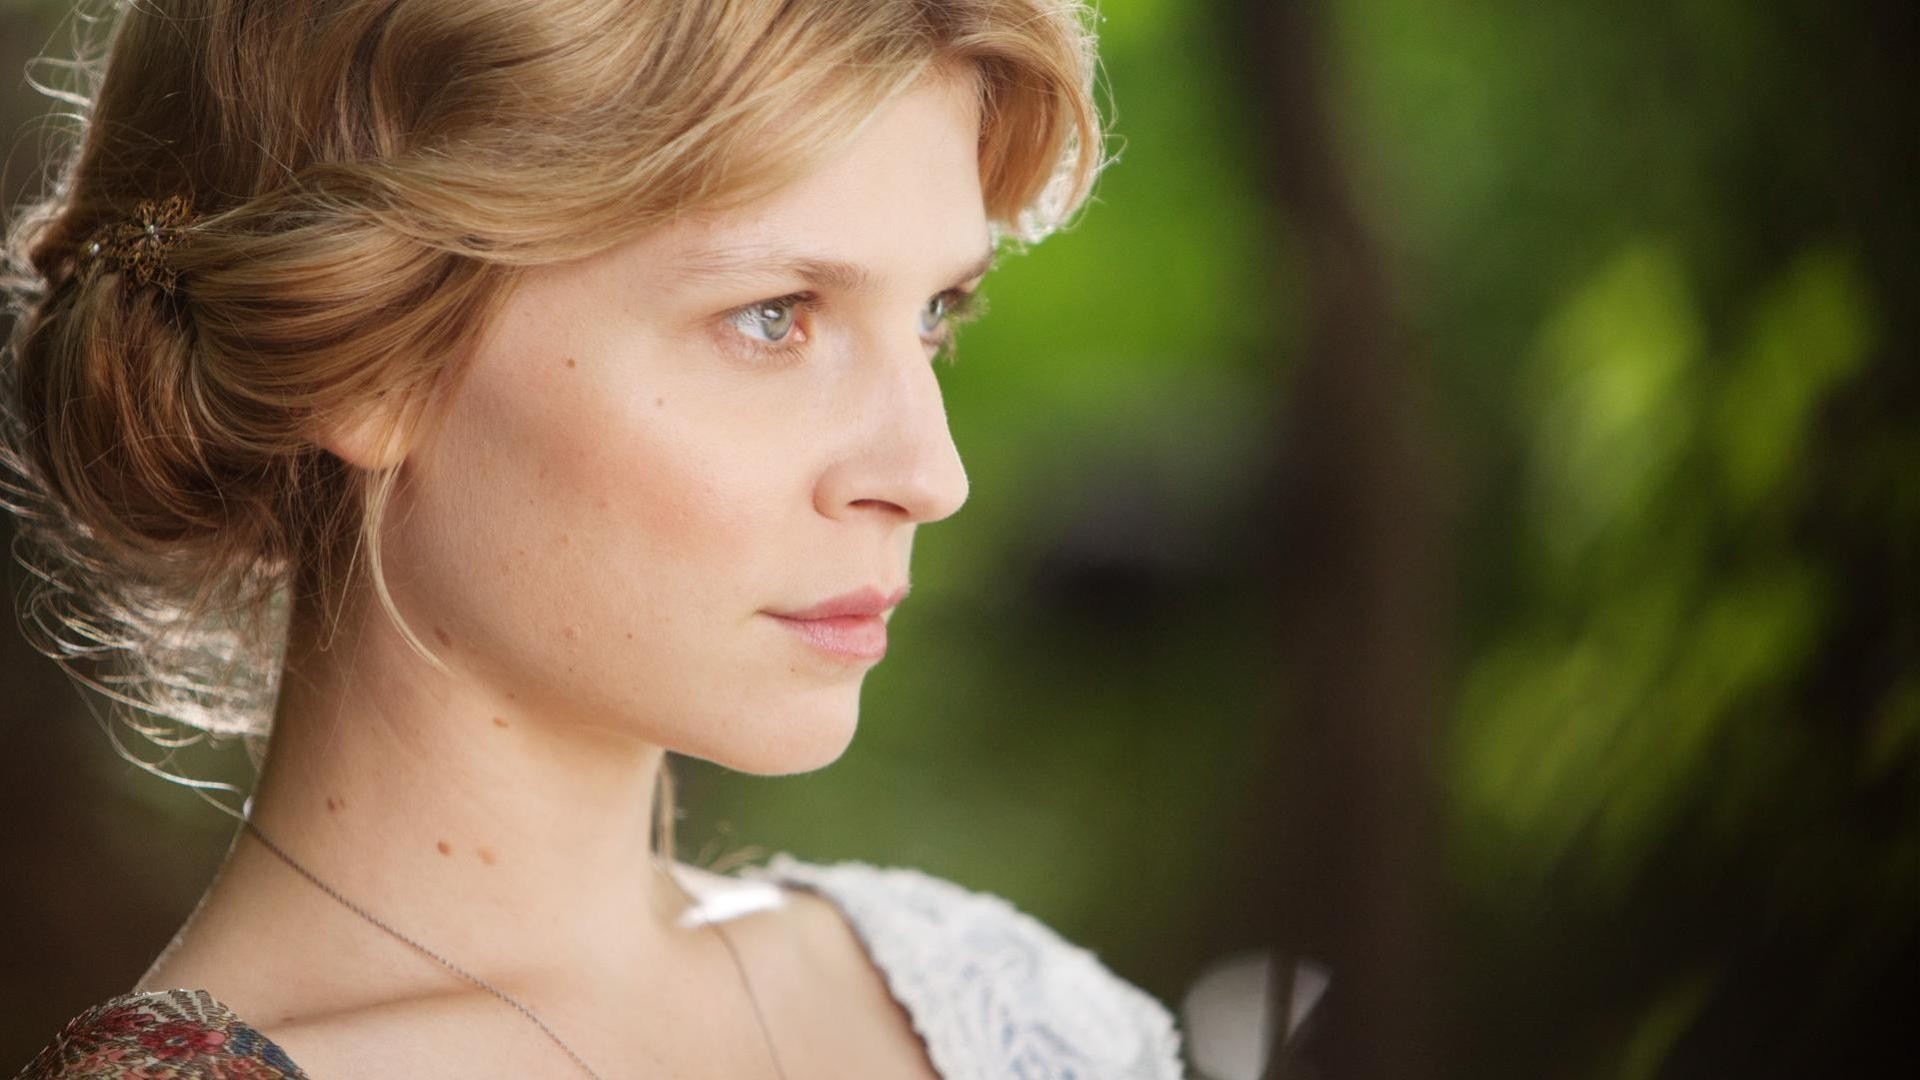 Actress Clemence Poesy 1920x1080